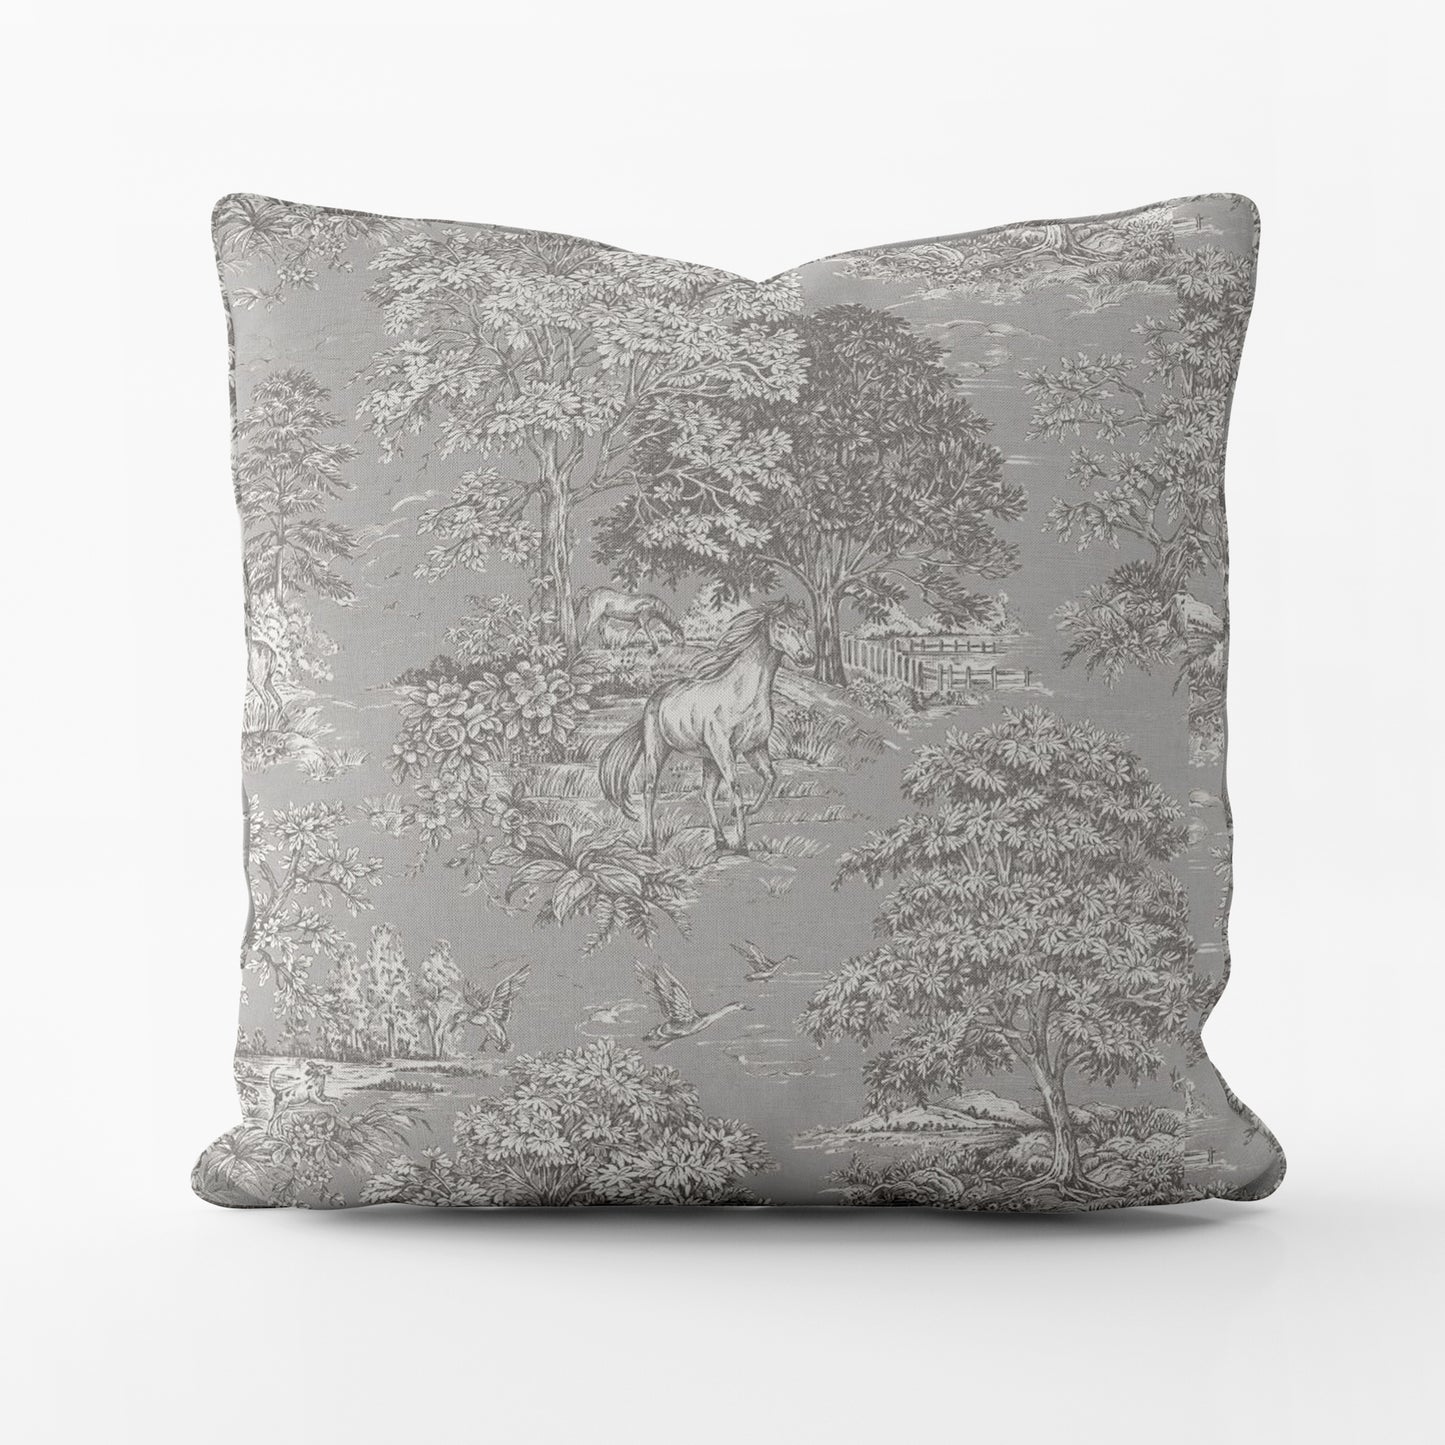 Decorative Pillows in Yellowstone Dove Blue Gray Country Toile- Horses, Deer, Dogs- Large Scale